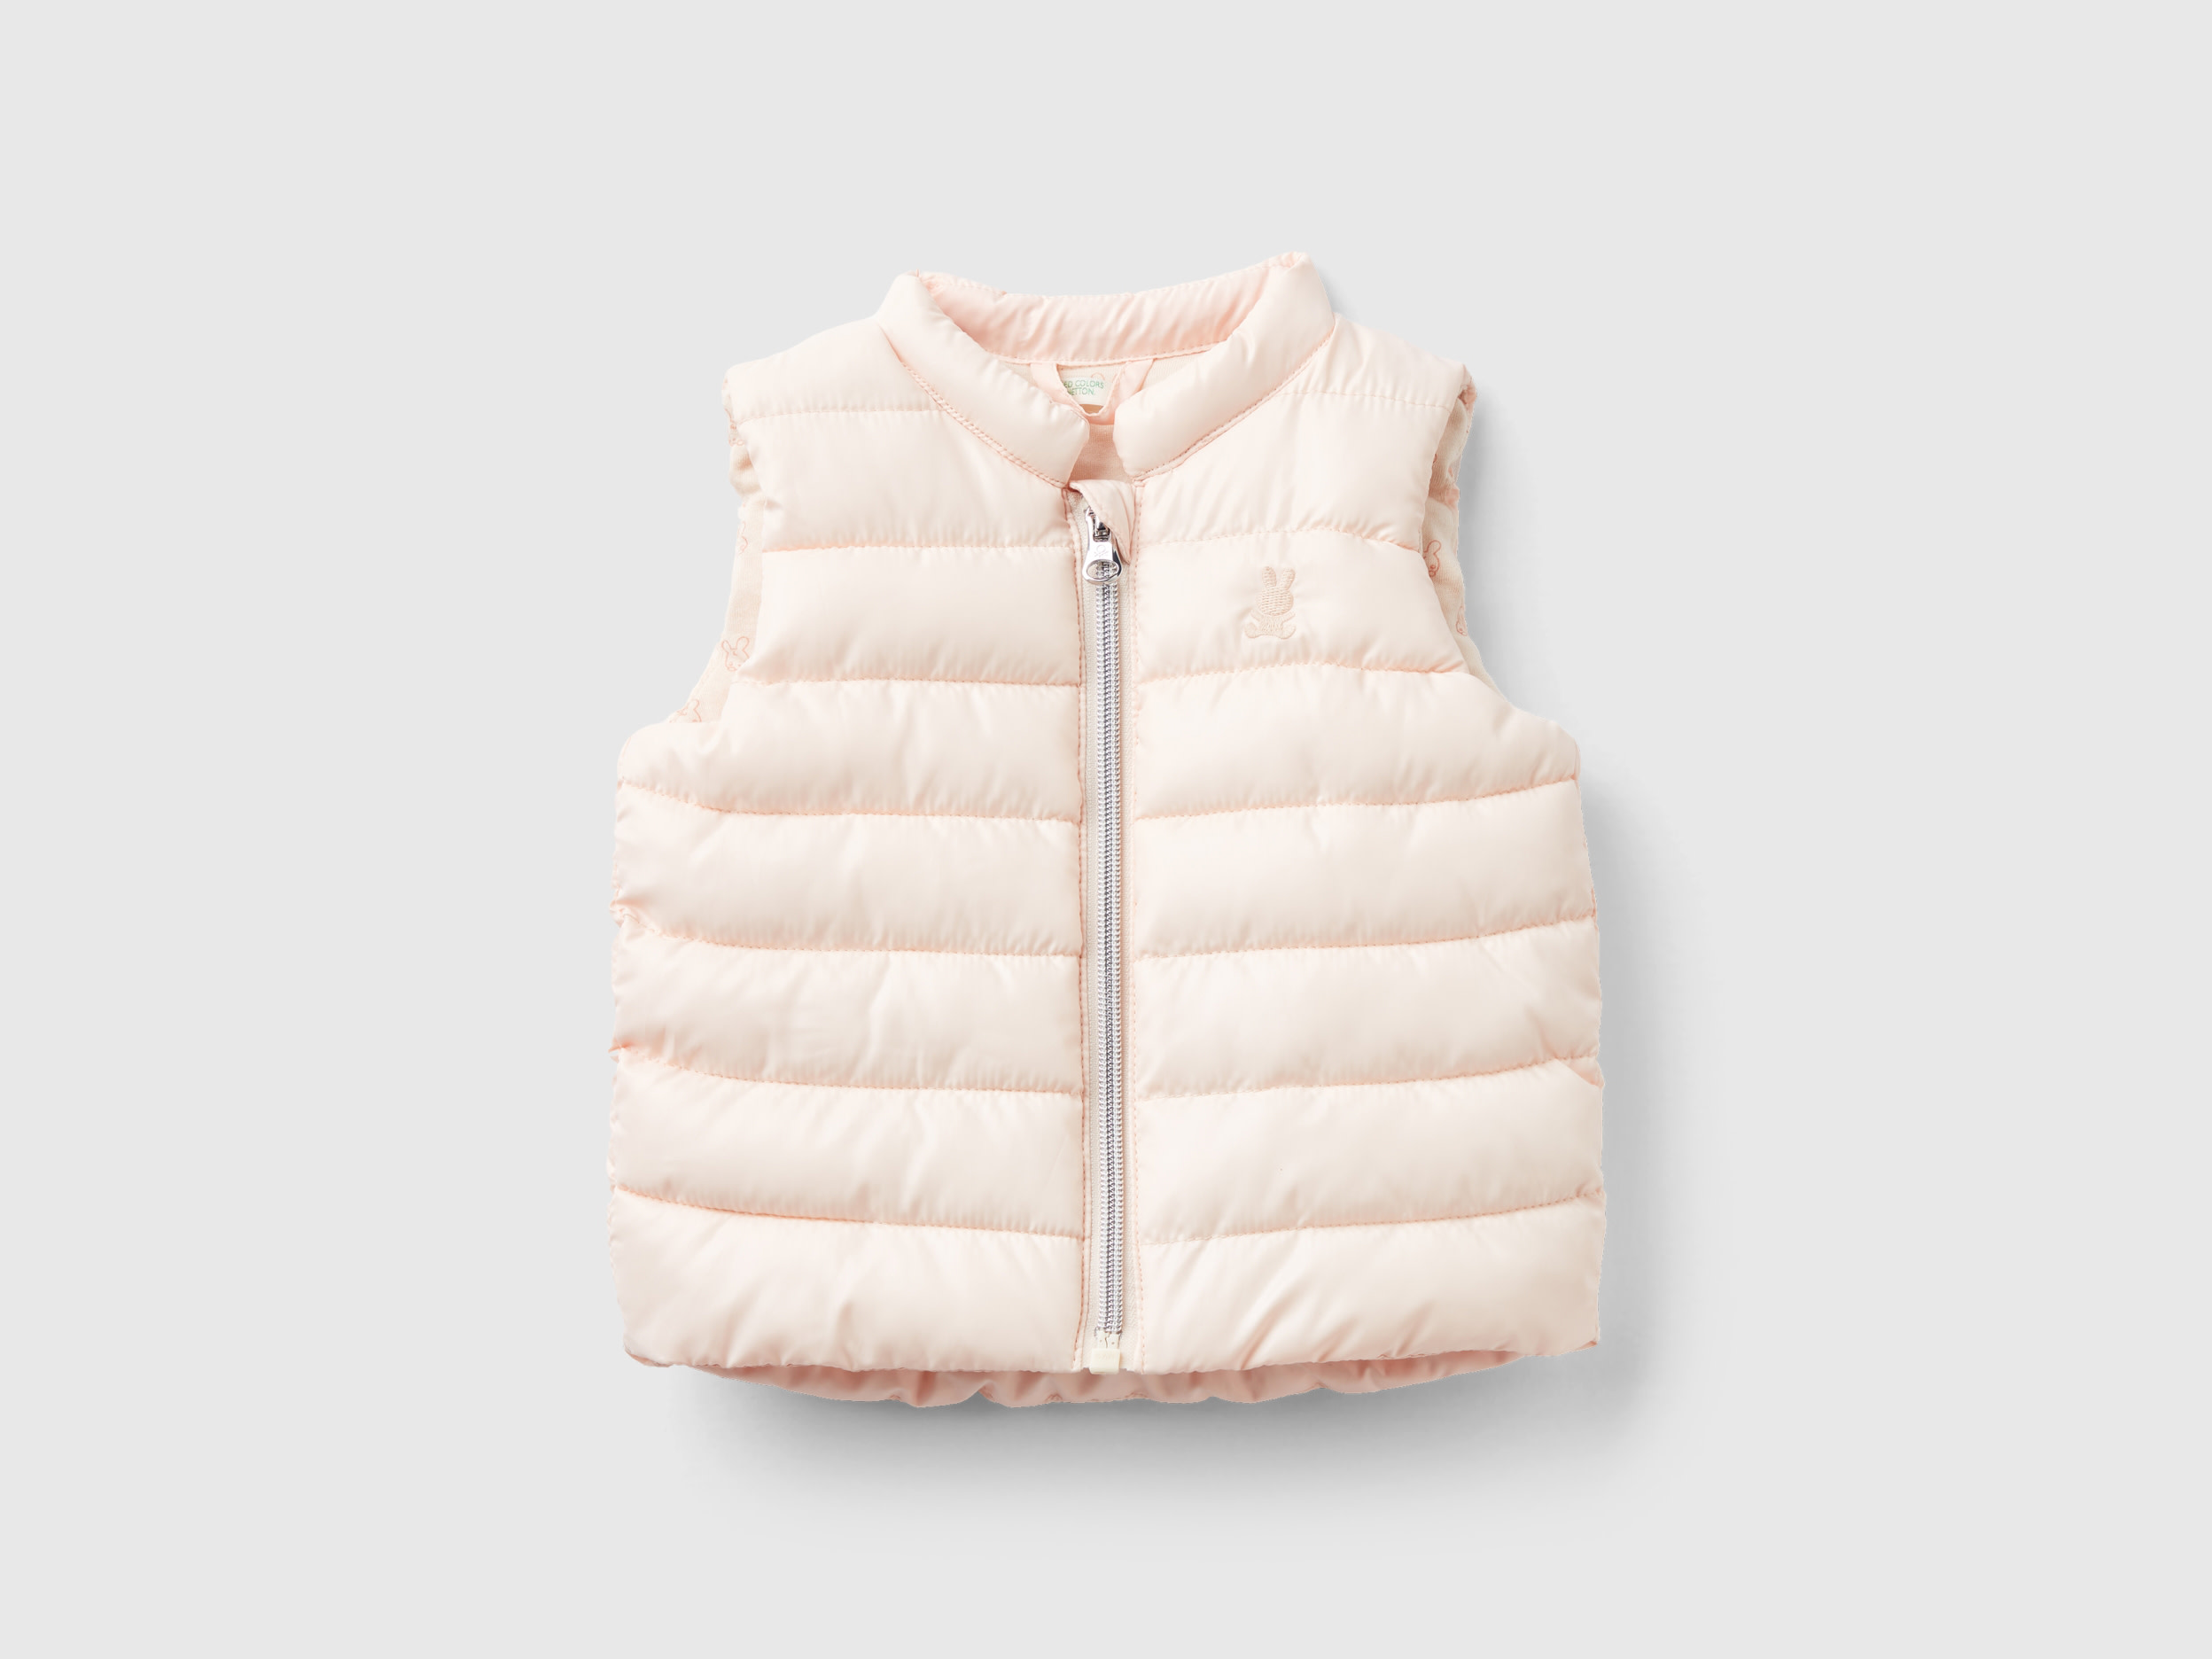 Benetton, Padded Vest In Technical Fabric, size 3-6, Peach, Kids